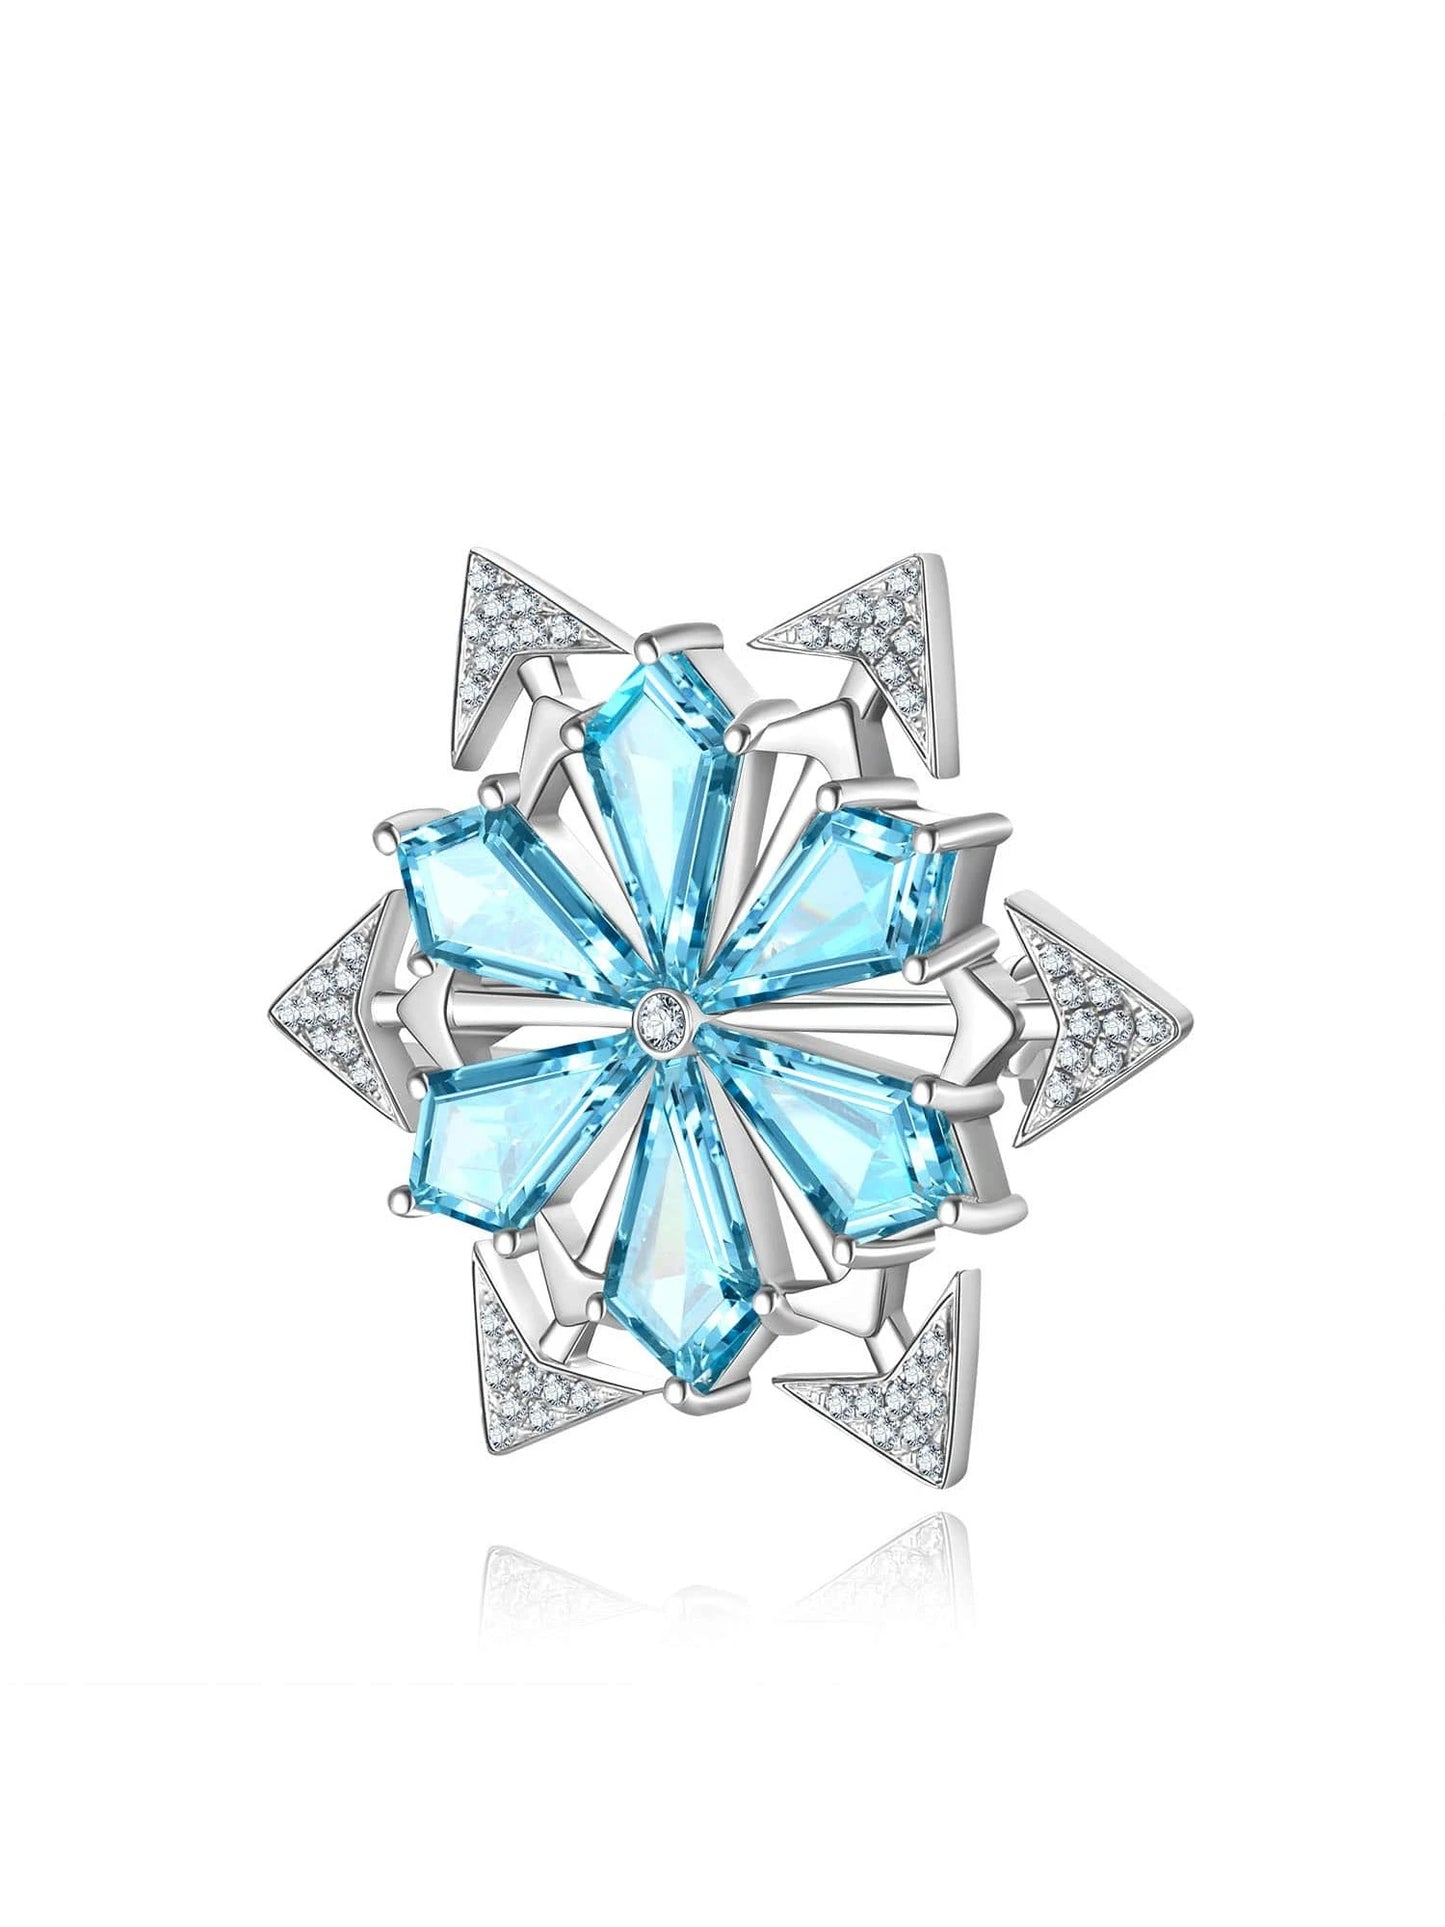 Sterling Silver Snowflake Sparkle Brooch